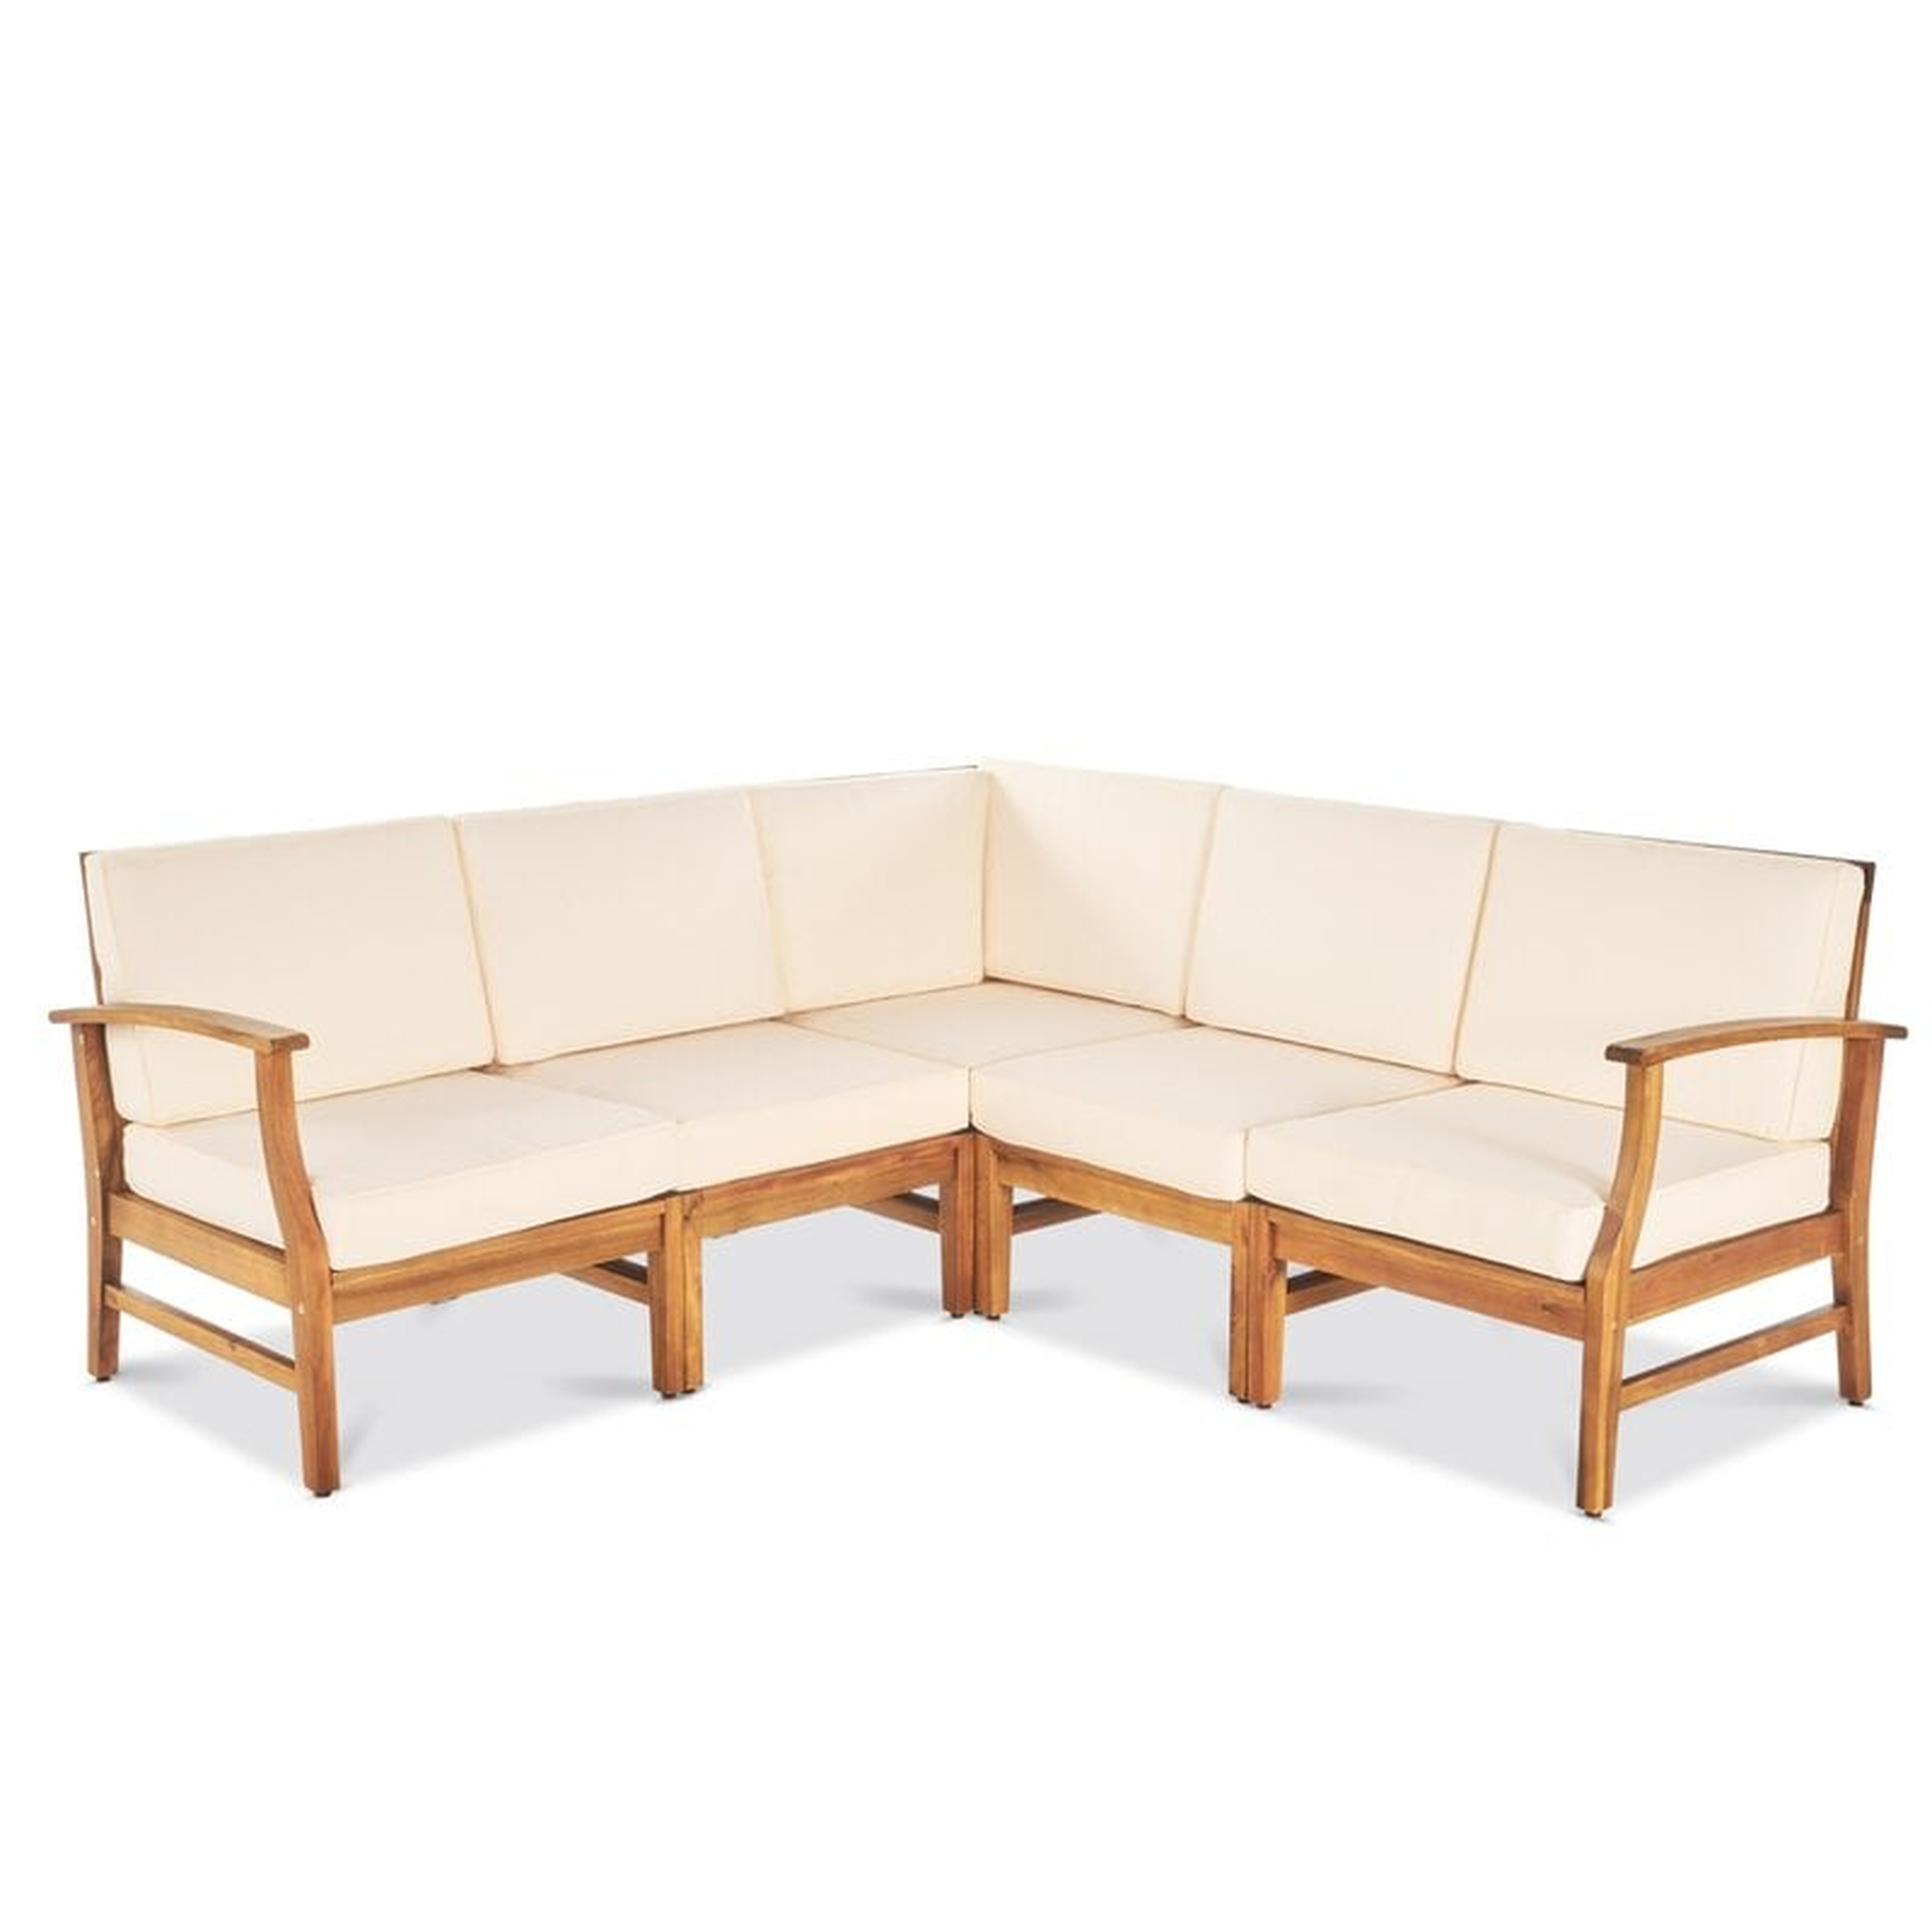 Bevelyn 24'' Wide Outdoor Symmetrical Patio Sectional with Cushions, Cream - Wayfair